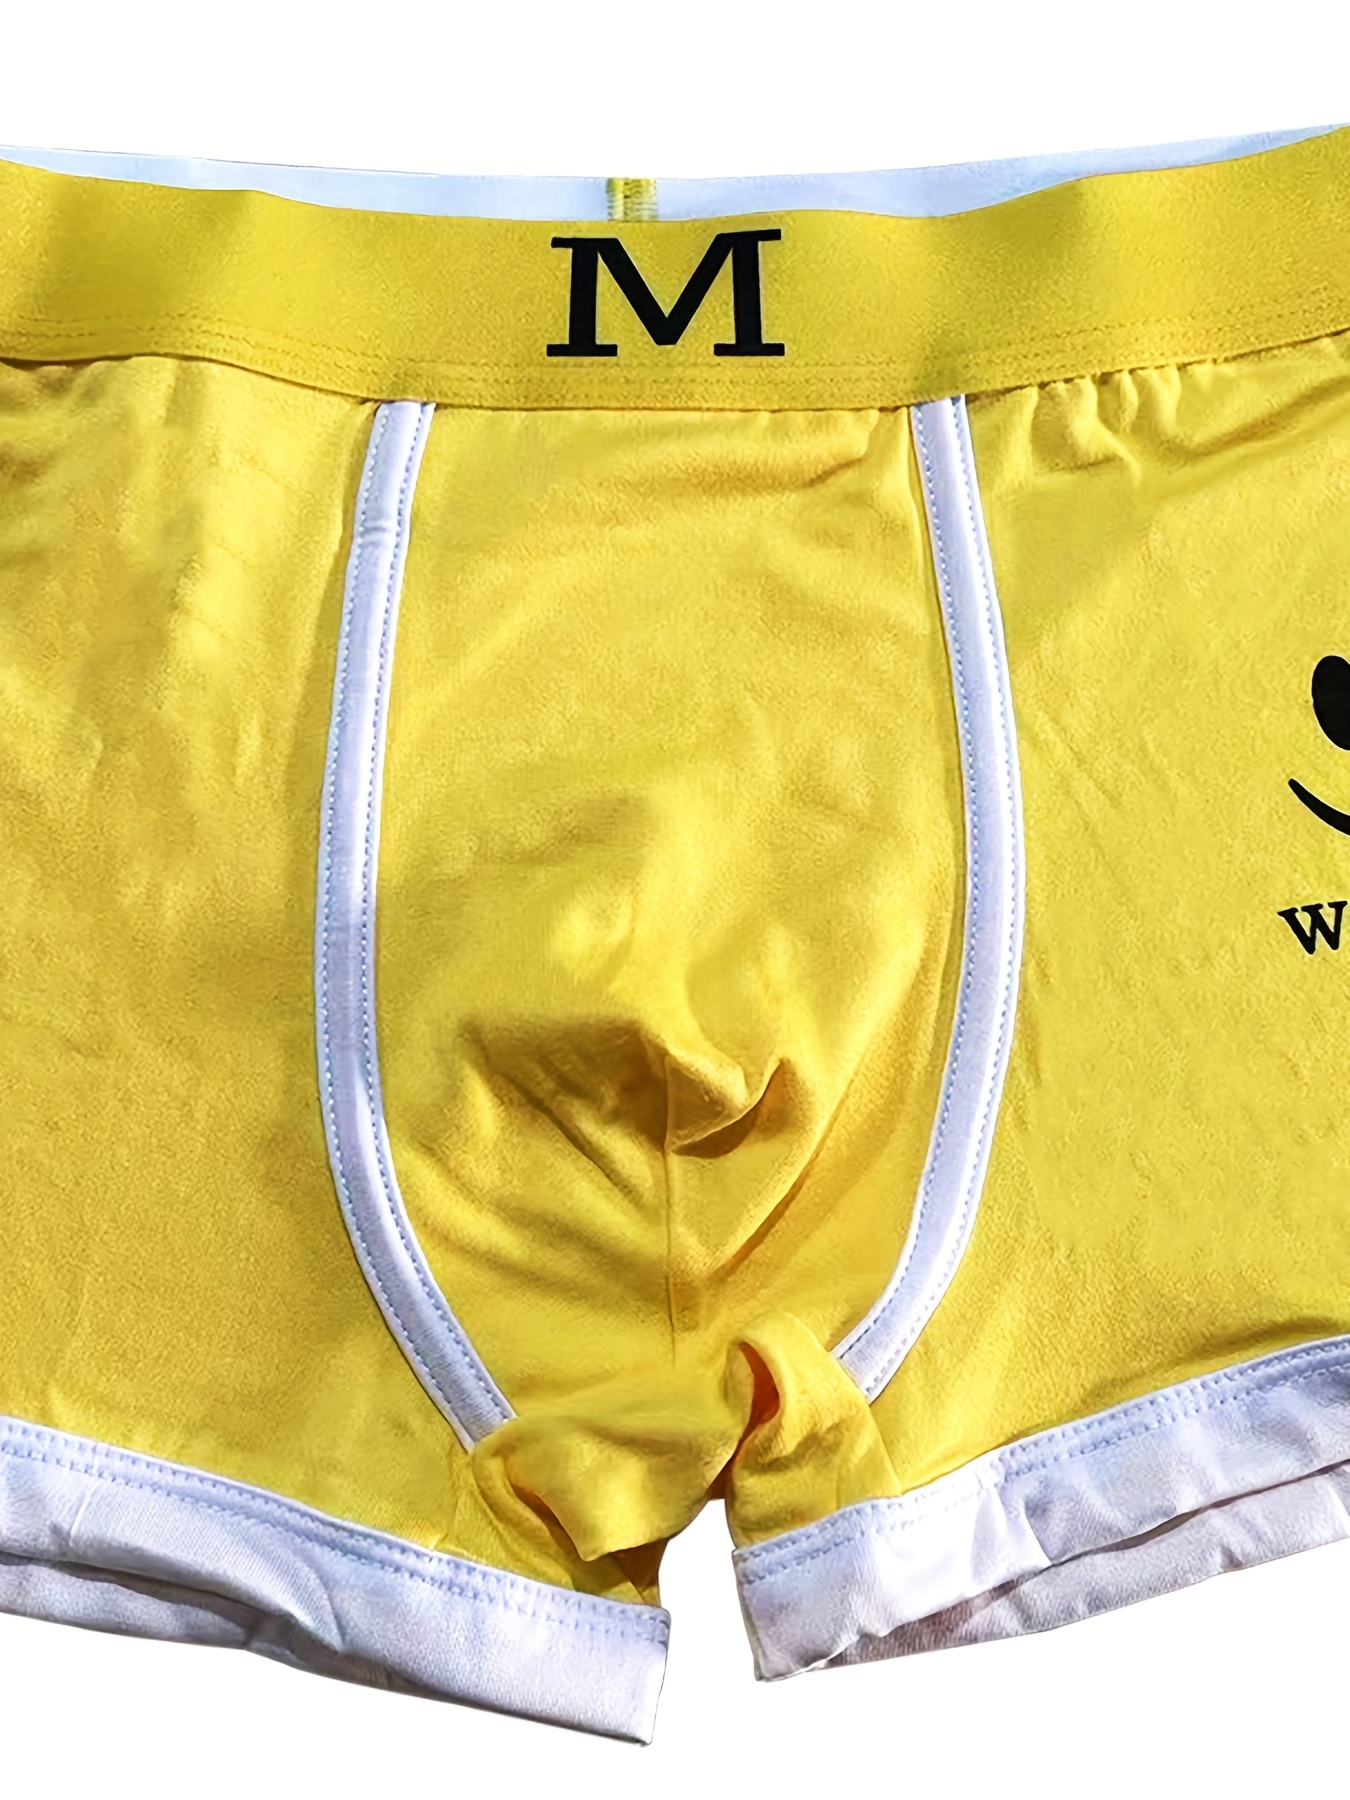 4 PROVEN REASONS YOU SHOULD WEAR BOXER BRIEFS - Smiley Socks Company